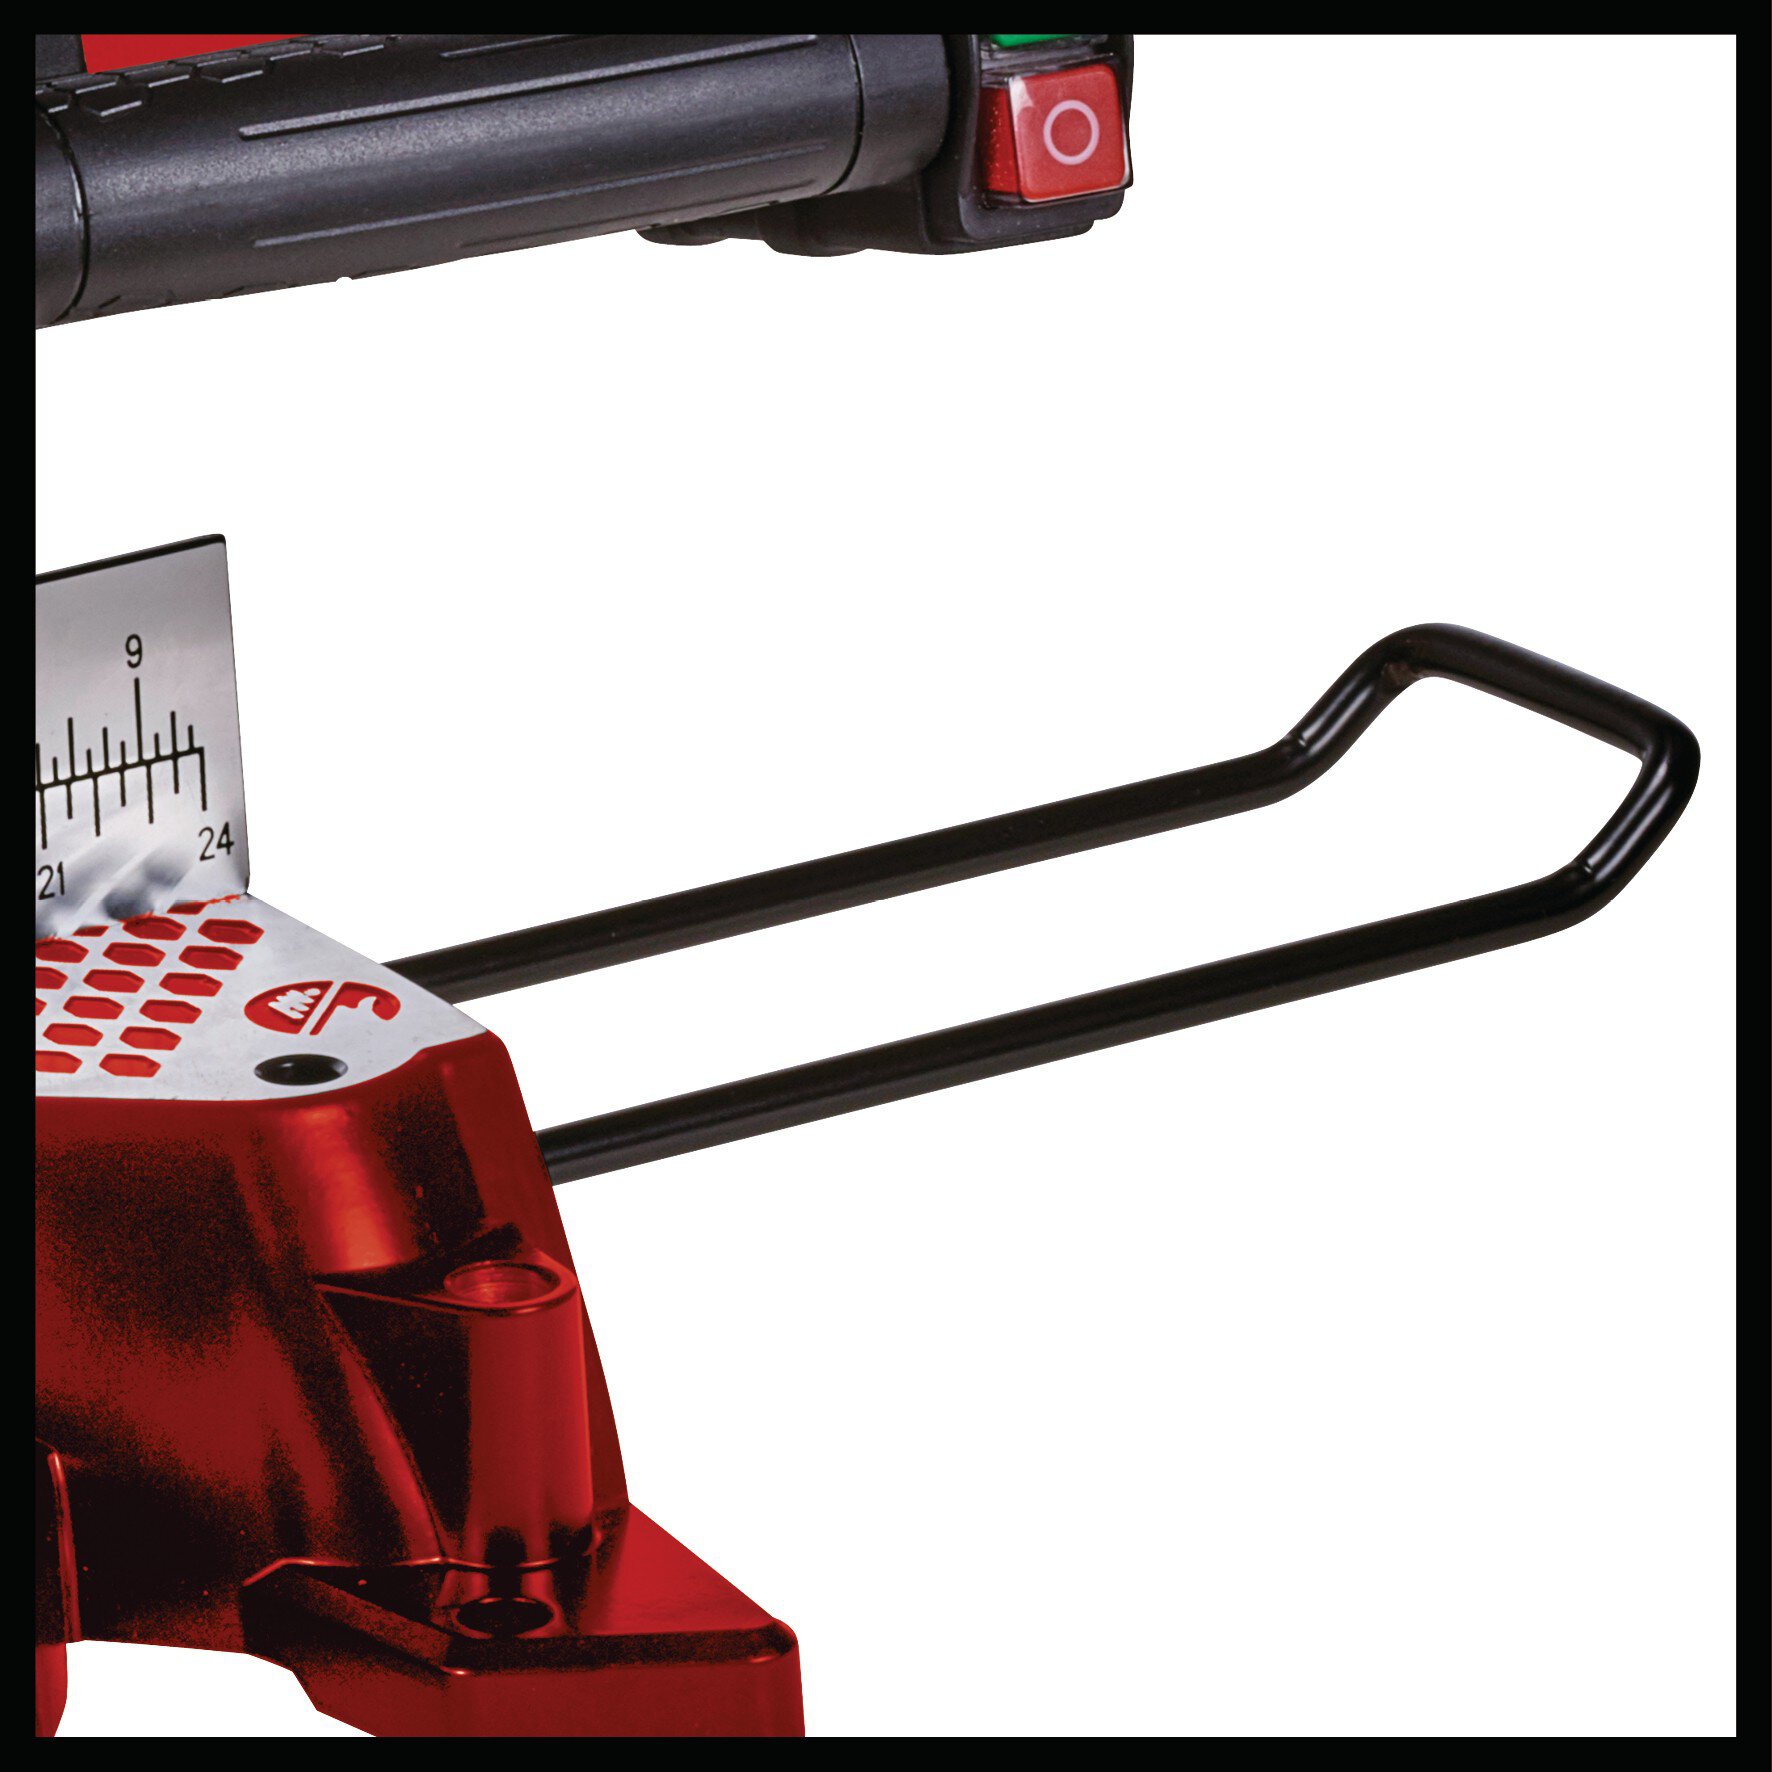 einhell-classic-mitre-saw-with-upper-table-4300347-detail_image-005